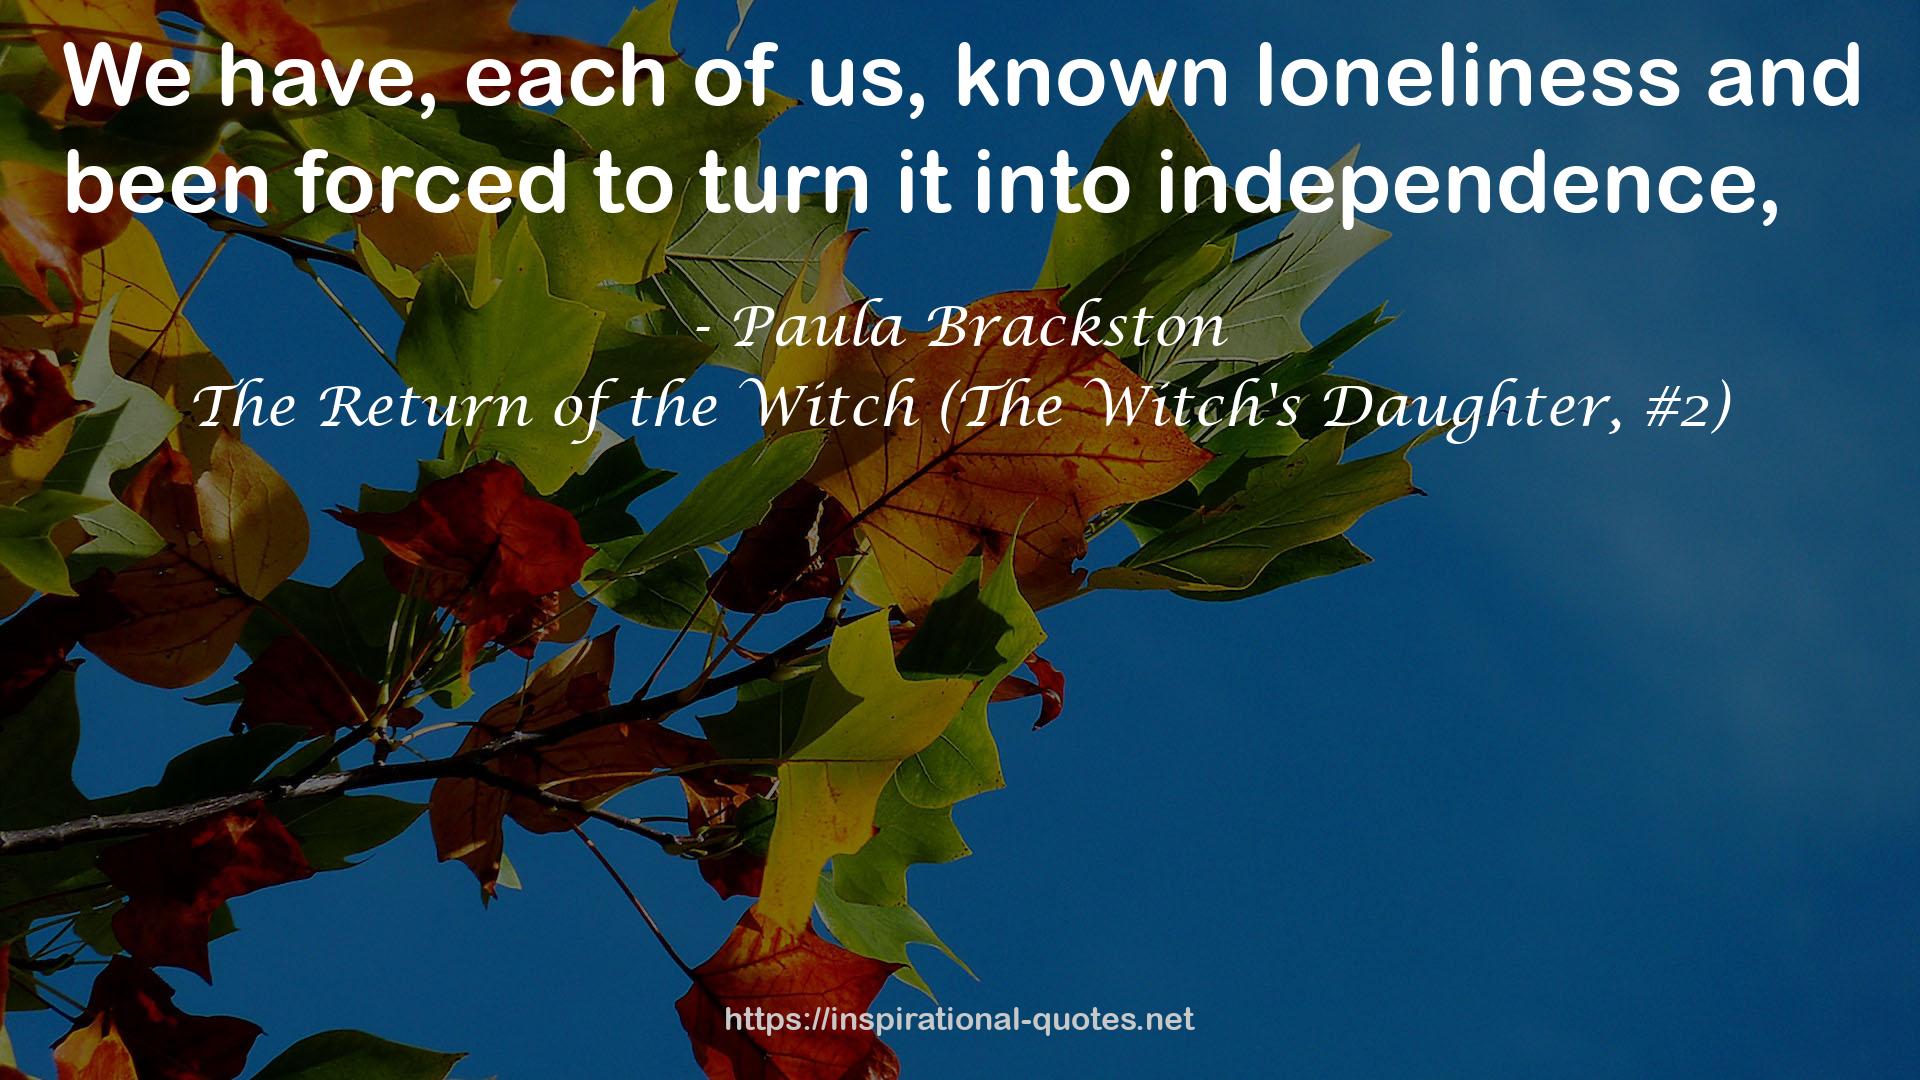 The Return of the Witch (The Witch's Daughter, #2) QUOTES